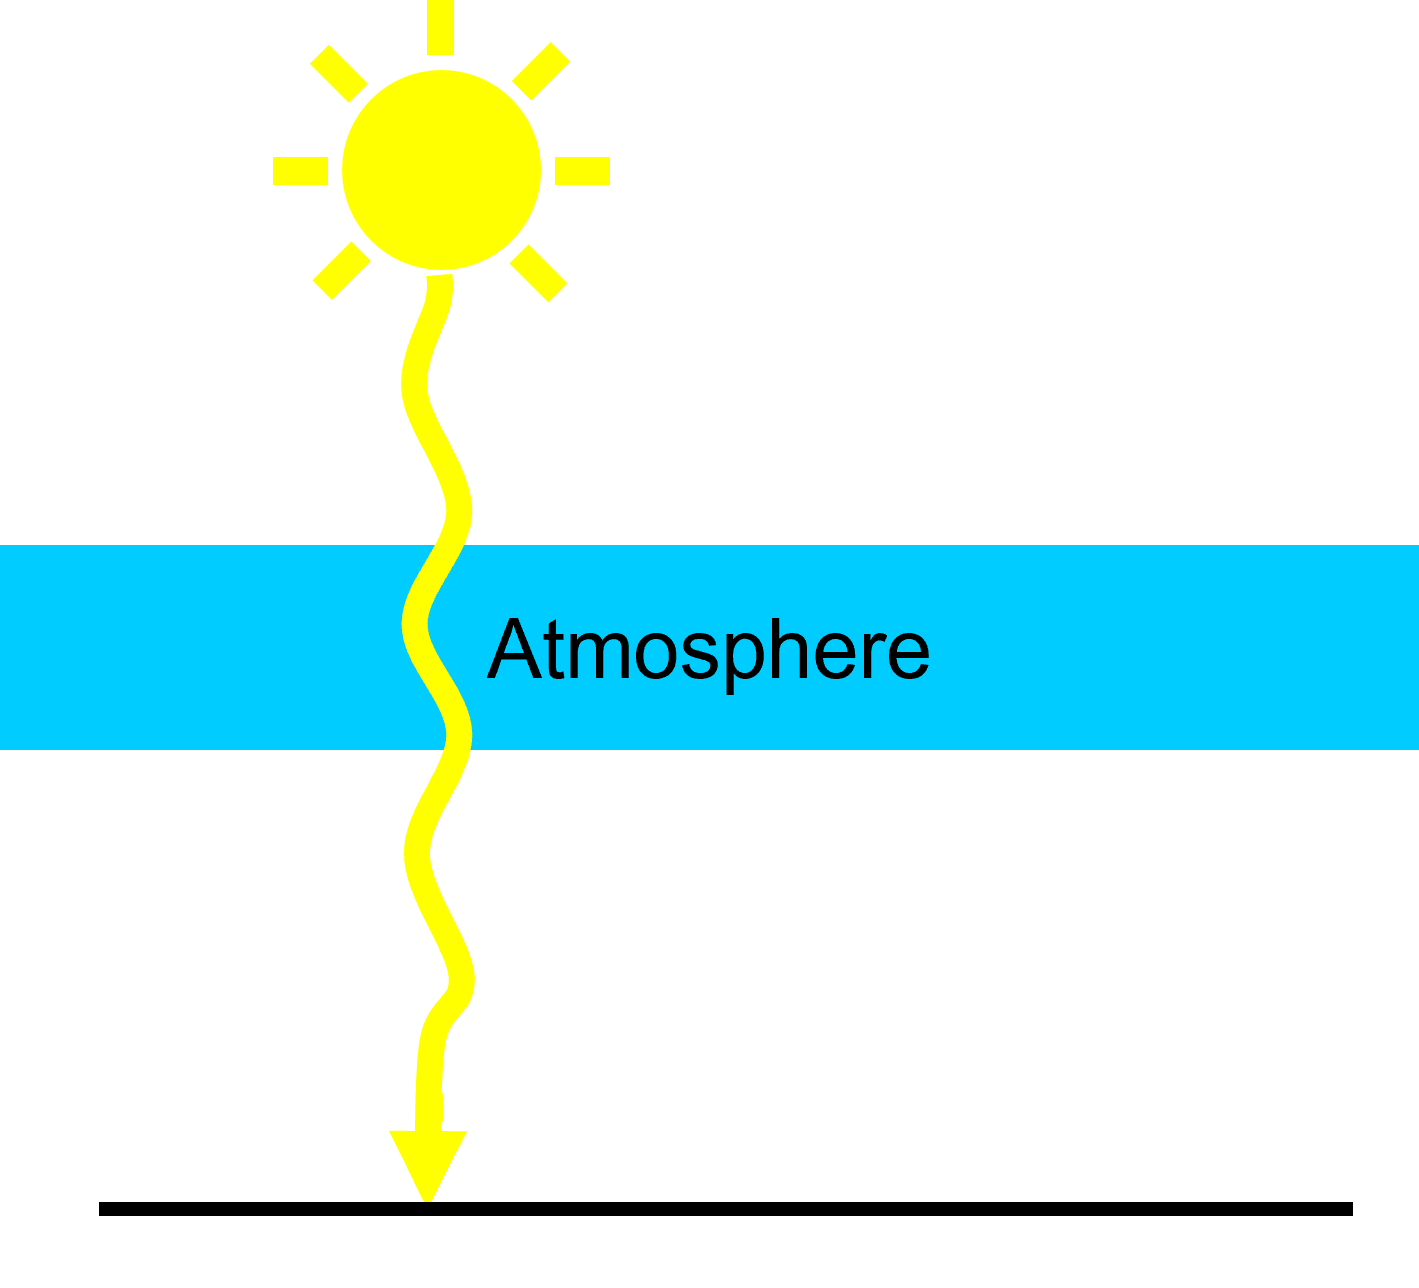 <p>____ in atmosphere trap more radiation in troposphere</p>